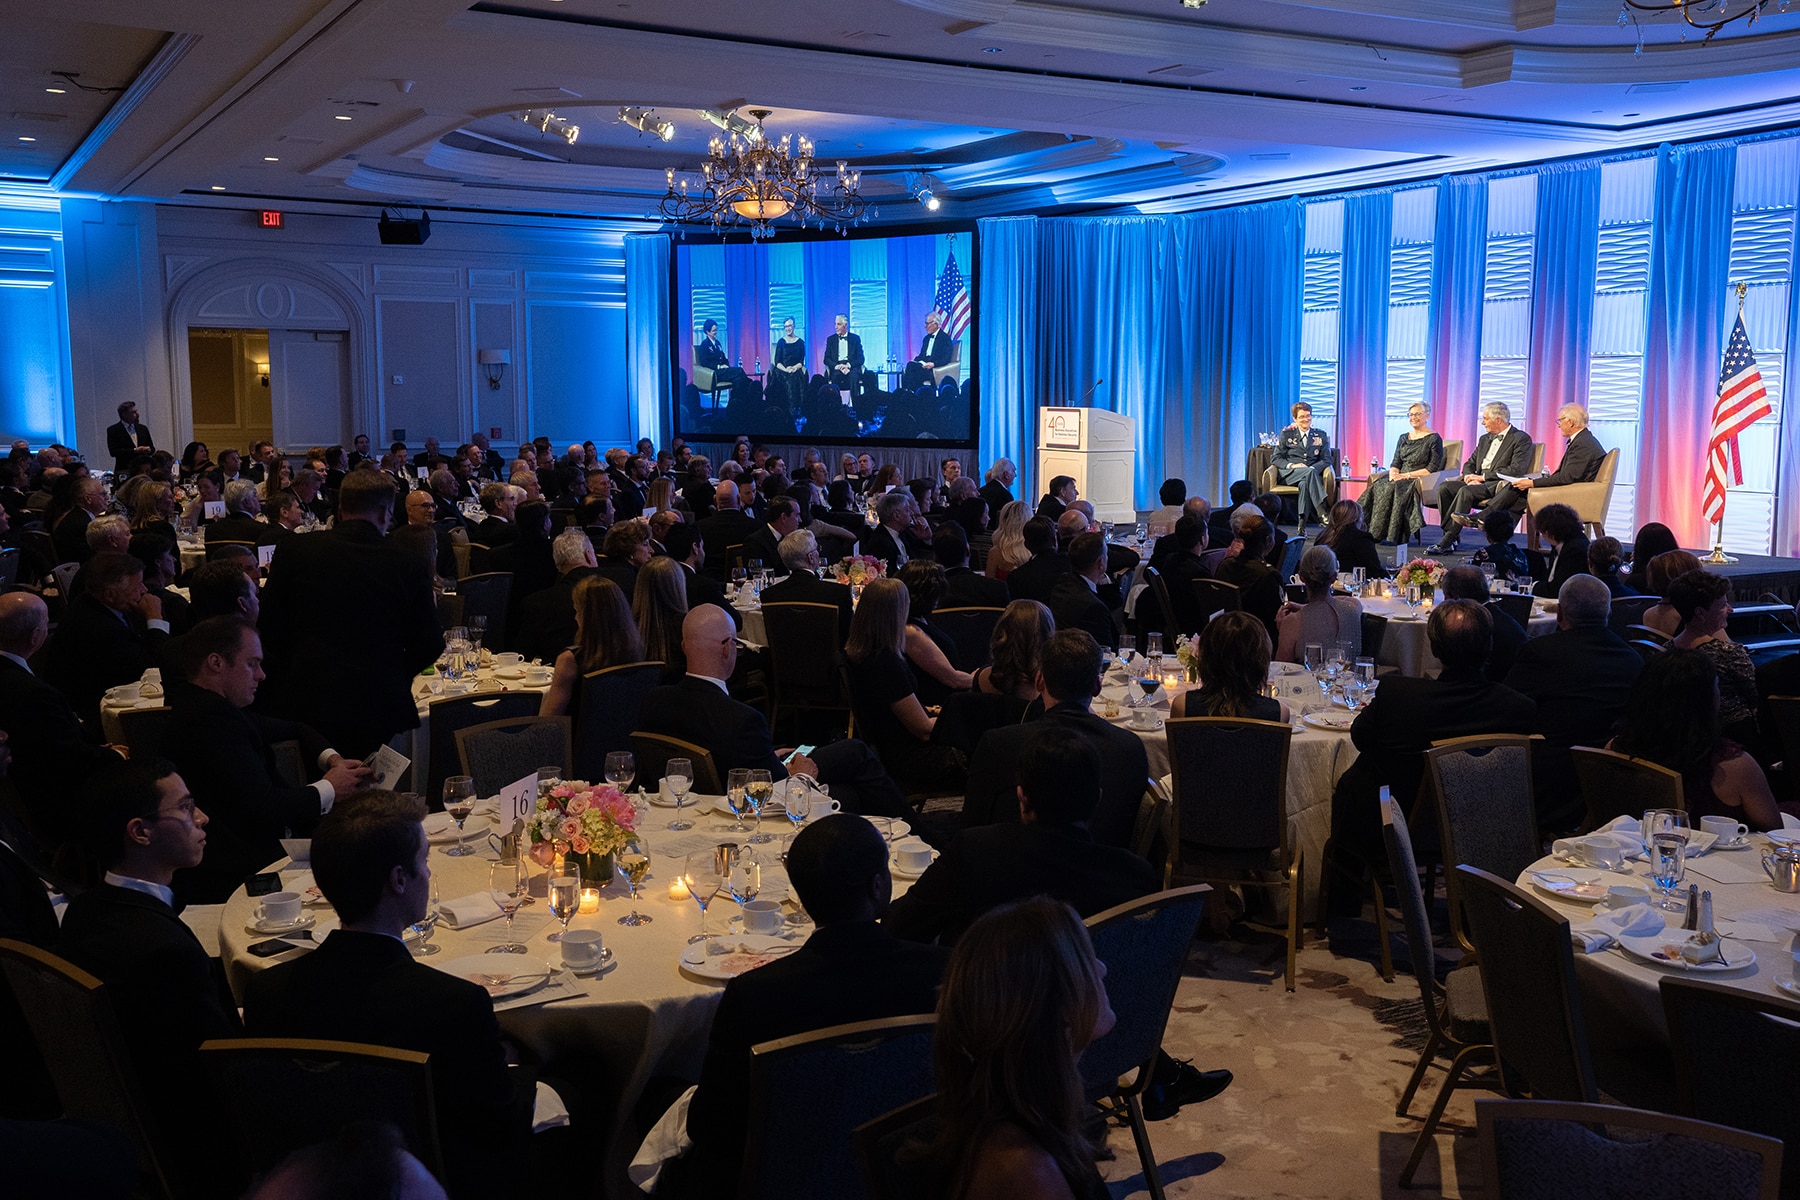 honorees fireside chat at 2022 Eisenhower Awards gala